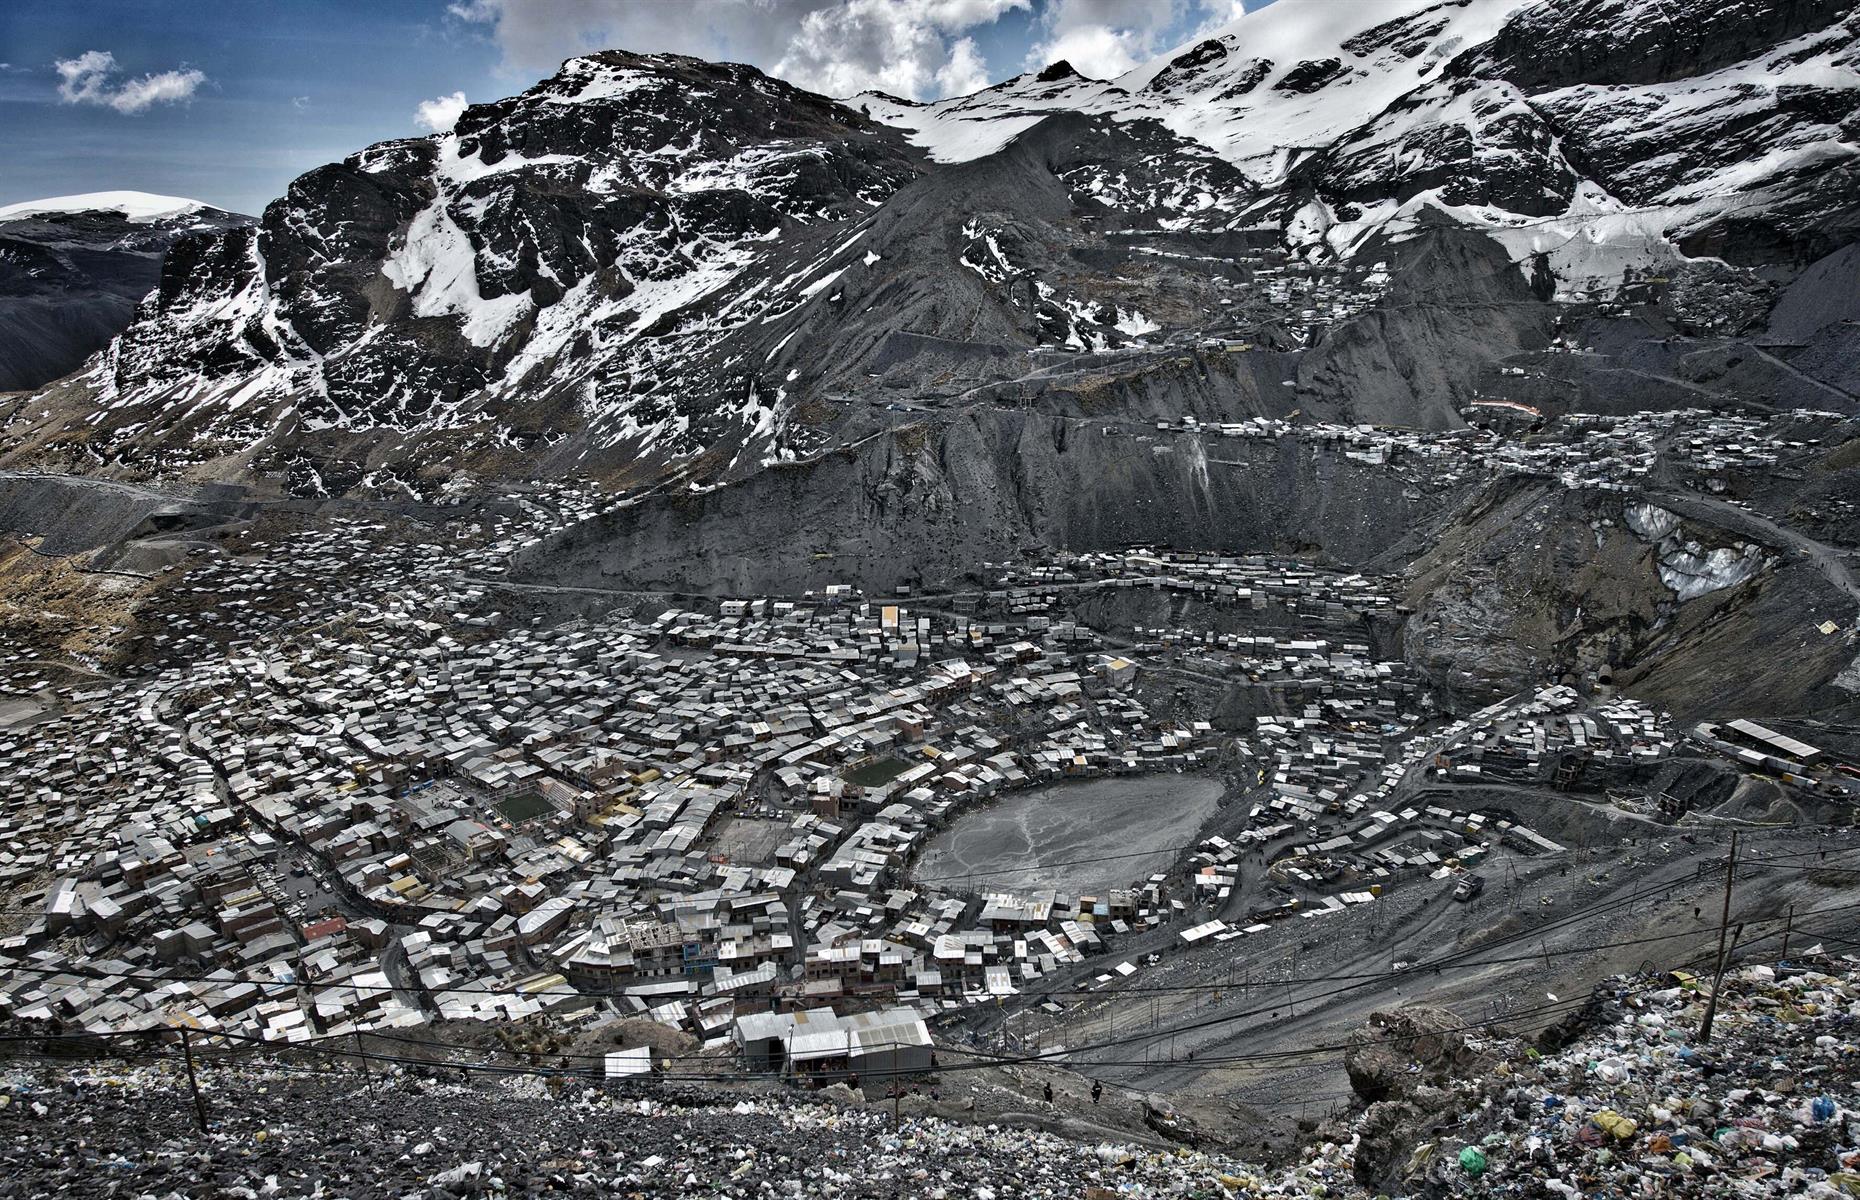 <p>At a height of over 16,000 feet, La Rinconada in Peru is the highest human habitation in the world. Perched atop Mount Ananea in the Peruvian Andes, the high-altitude homes are only accessible by a mountainside road and can take several days to reach. </p>